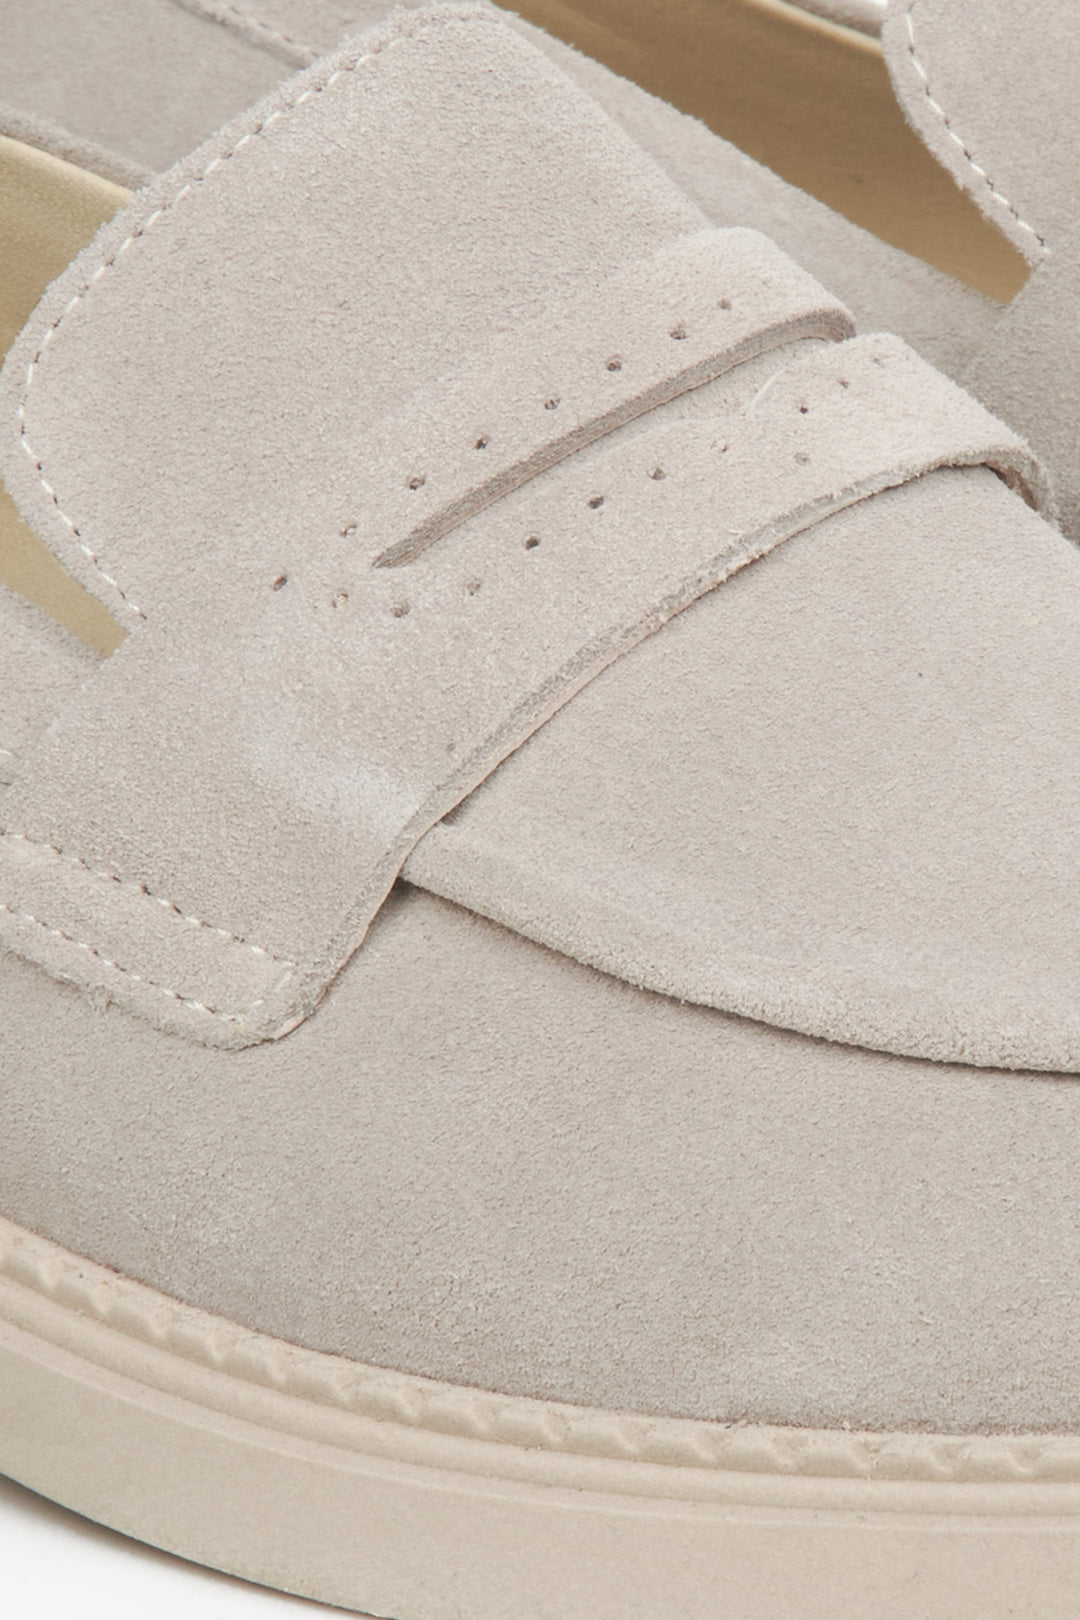 Women's light beige  loafers by Estro - a close-up on the sewing line.